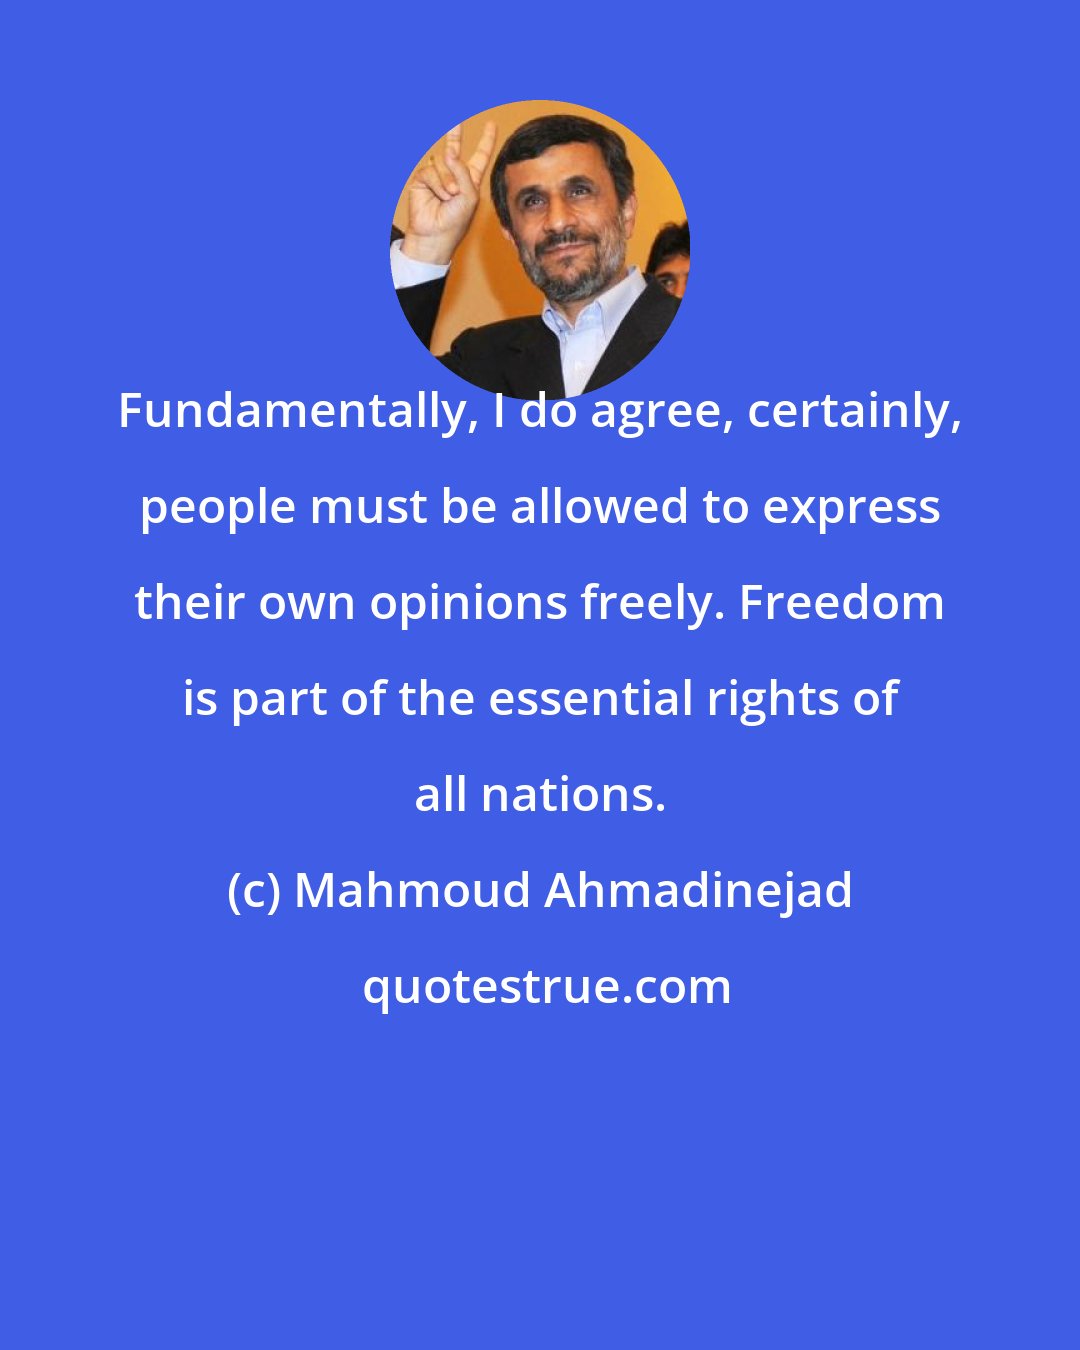 Mahmoud Ahmadinejad: Fundamentally, I do agree, certainly, people must be allowed to express their own opinions freely. Freedom is part of the essential rights of all nations.